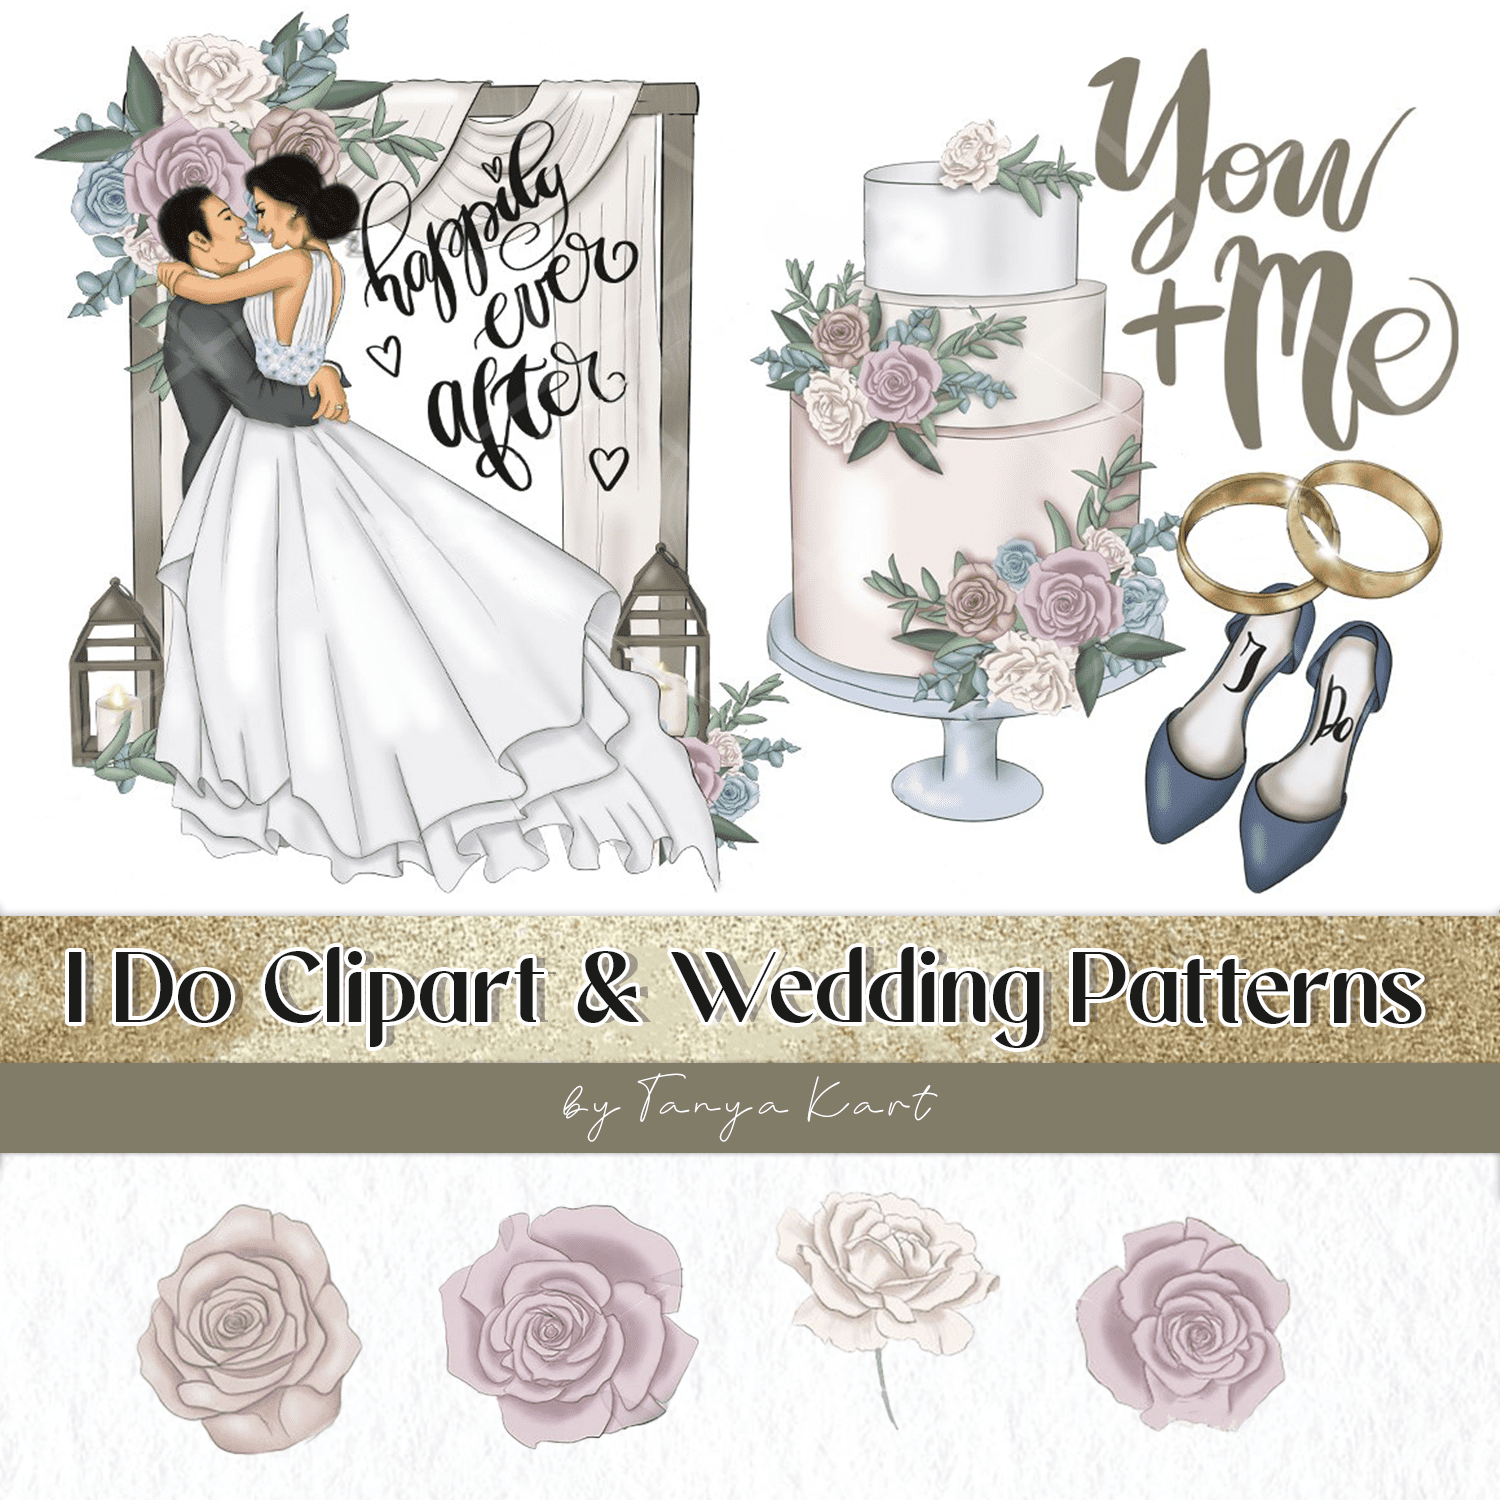 I Do Clipart & Wedding Patterns - main image preview.